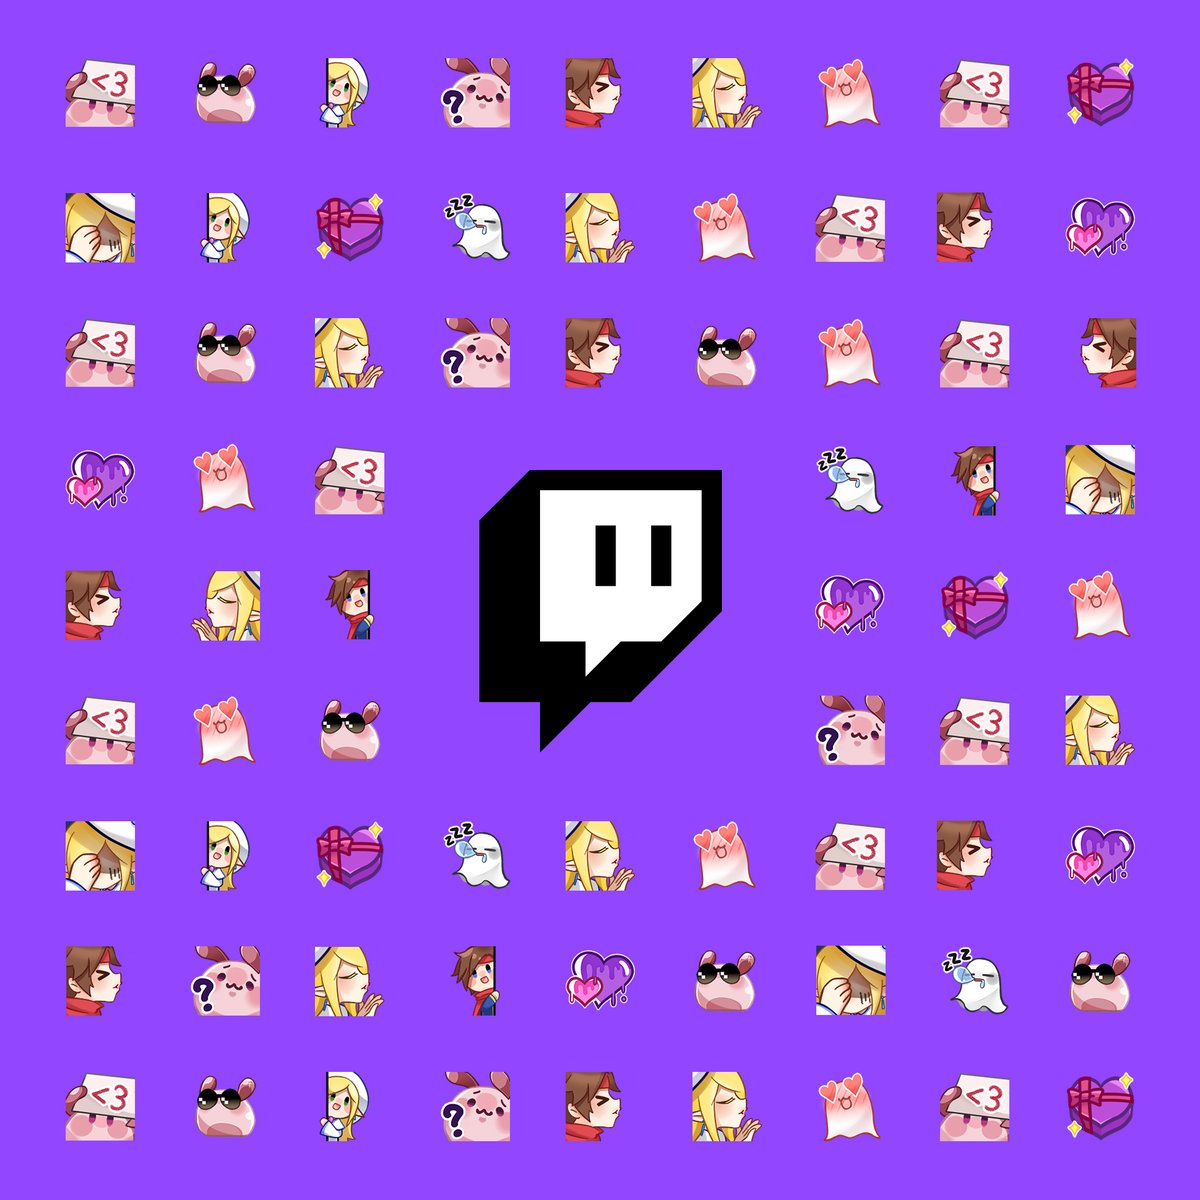 Twitch Love Is In The Air Sub To A Channel Gift A Channel Sub Or Cheer At Least 300 Bits To Permanently Unlock Special Streamer Love Emotes Made By Noctis00